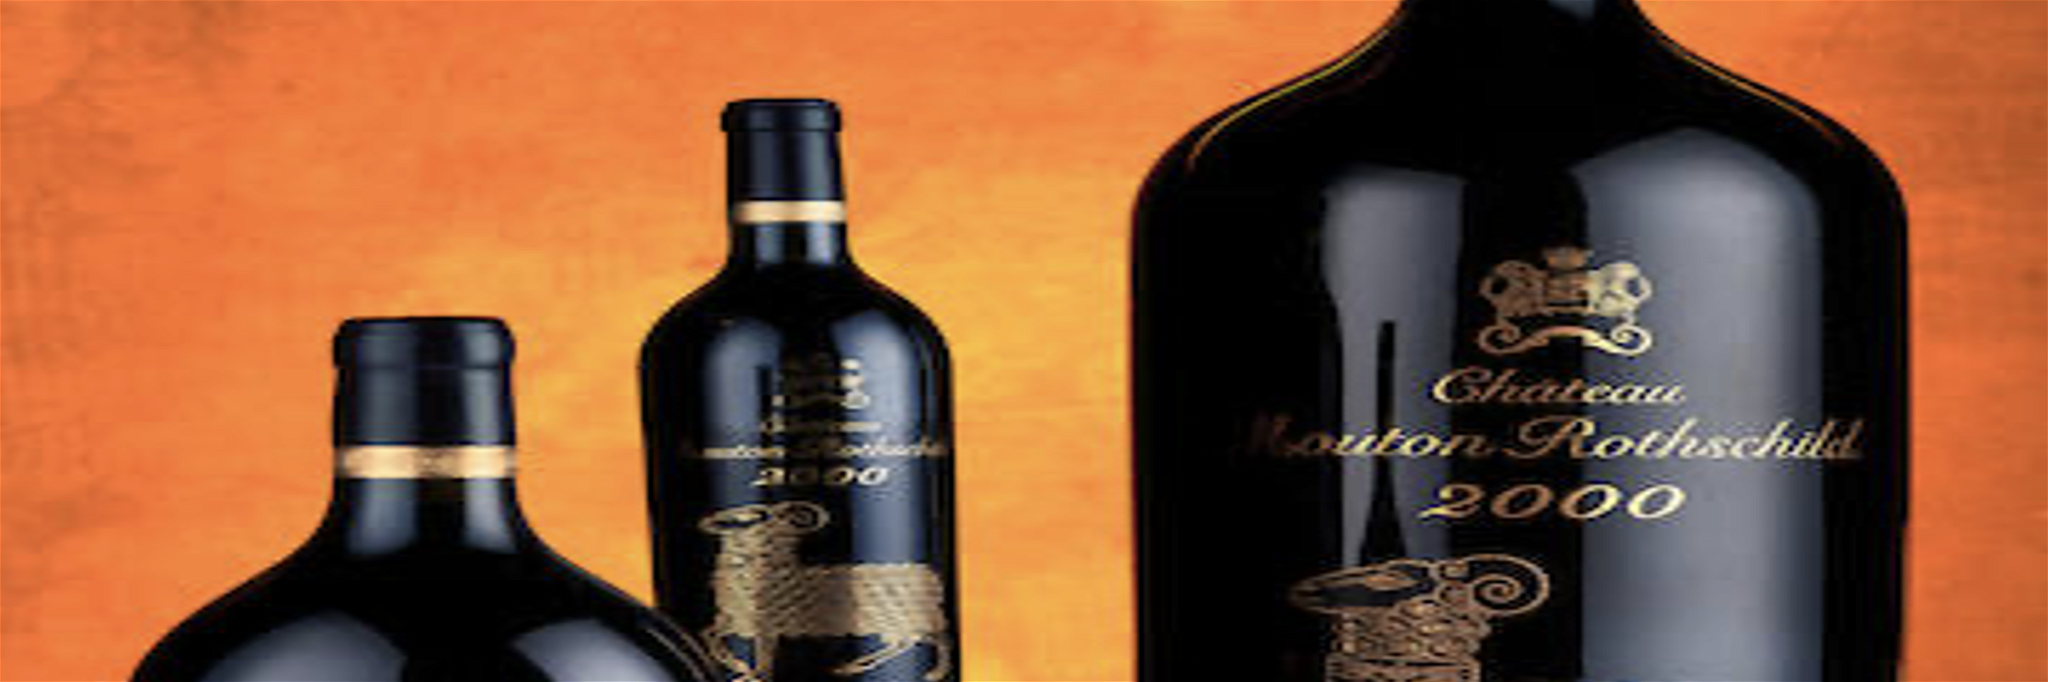 New Auction Record Set for a Château Mouton Rothschild “Nebuchadnezzar”